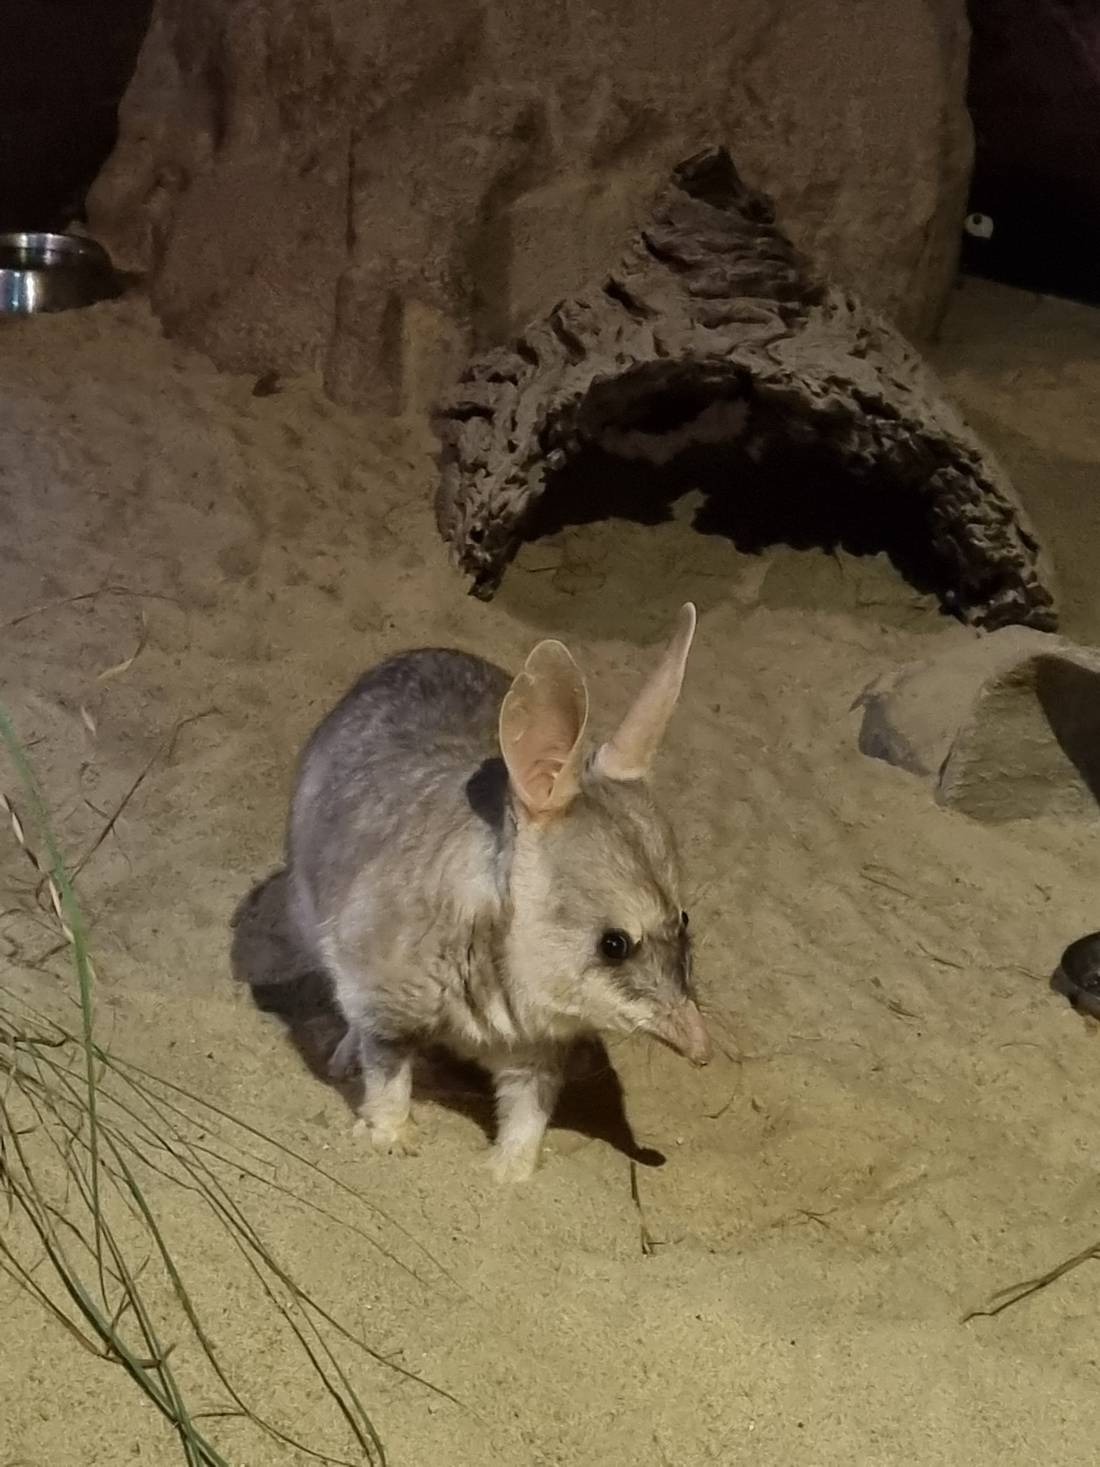 This is a nocturnal Bilby. It’s Australia’s answer to the Easter Bunny and now comes out in chocolate-shaped treats every year.